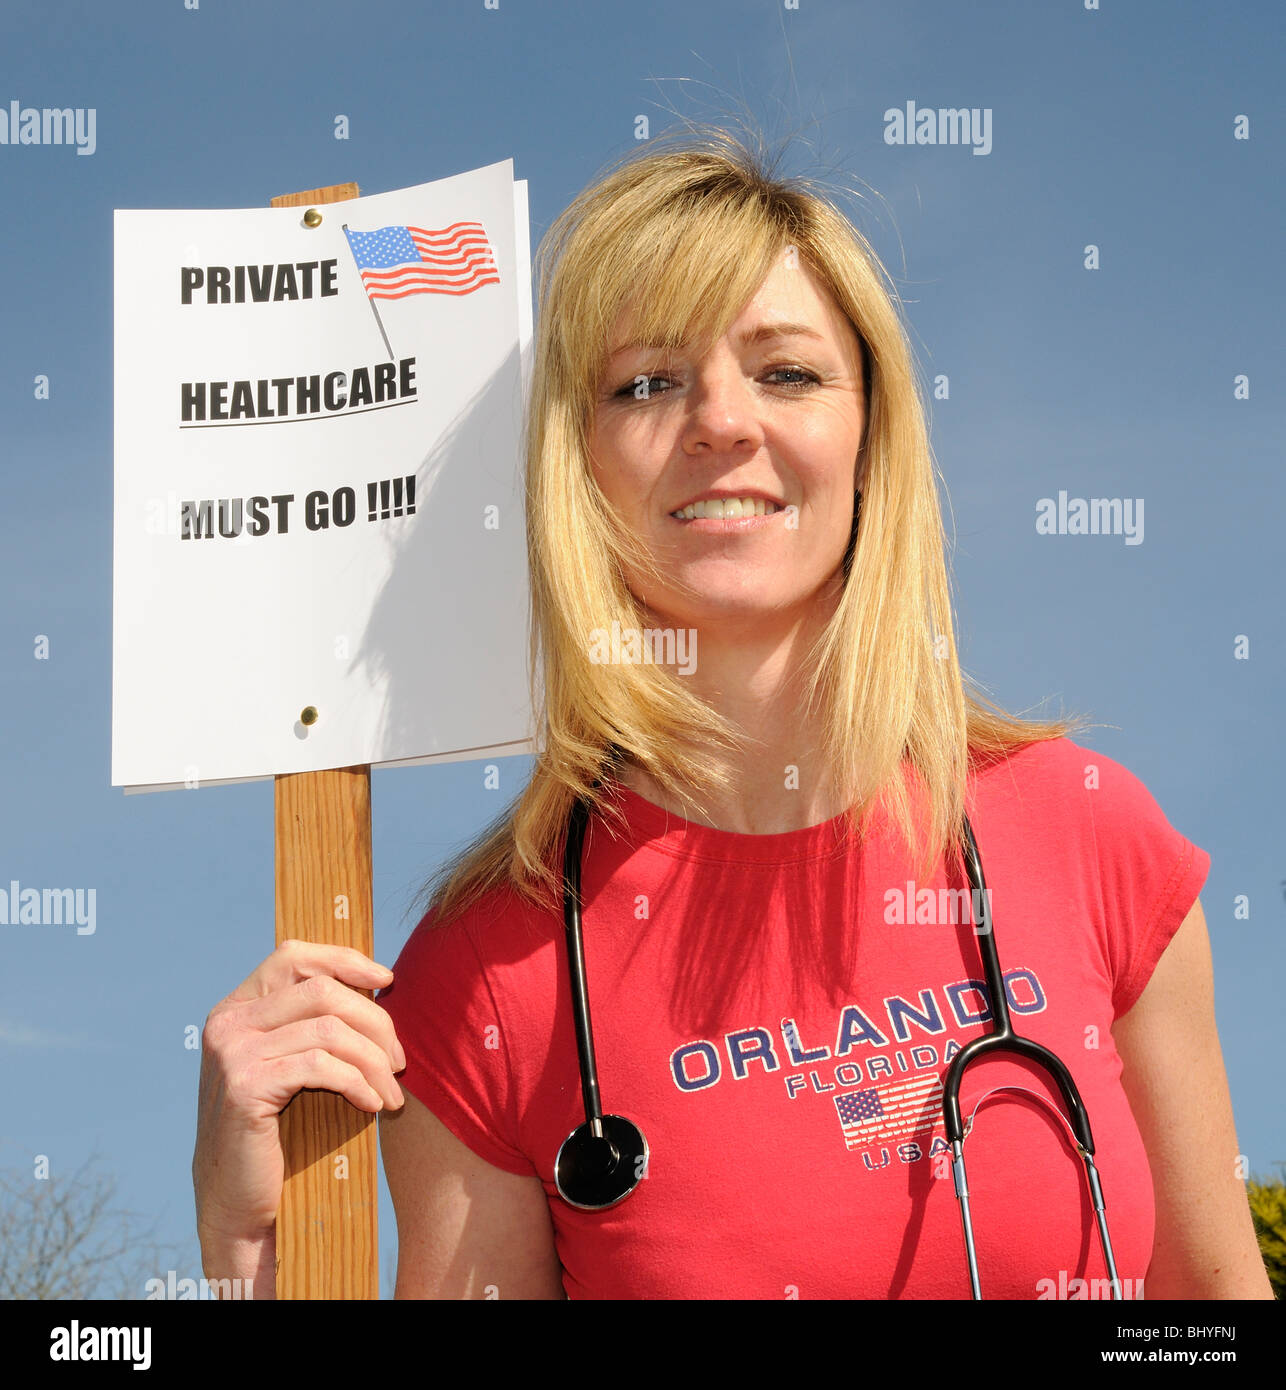 Private healthcare in the USA must go female protester wearing red shirt and holding a stethoscope Stock Photo